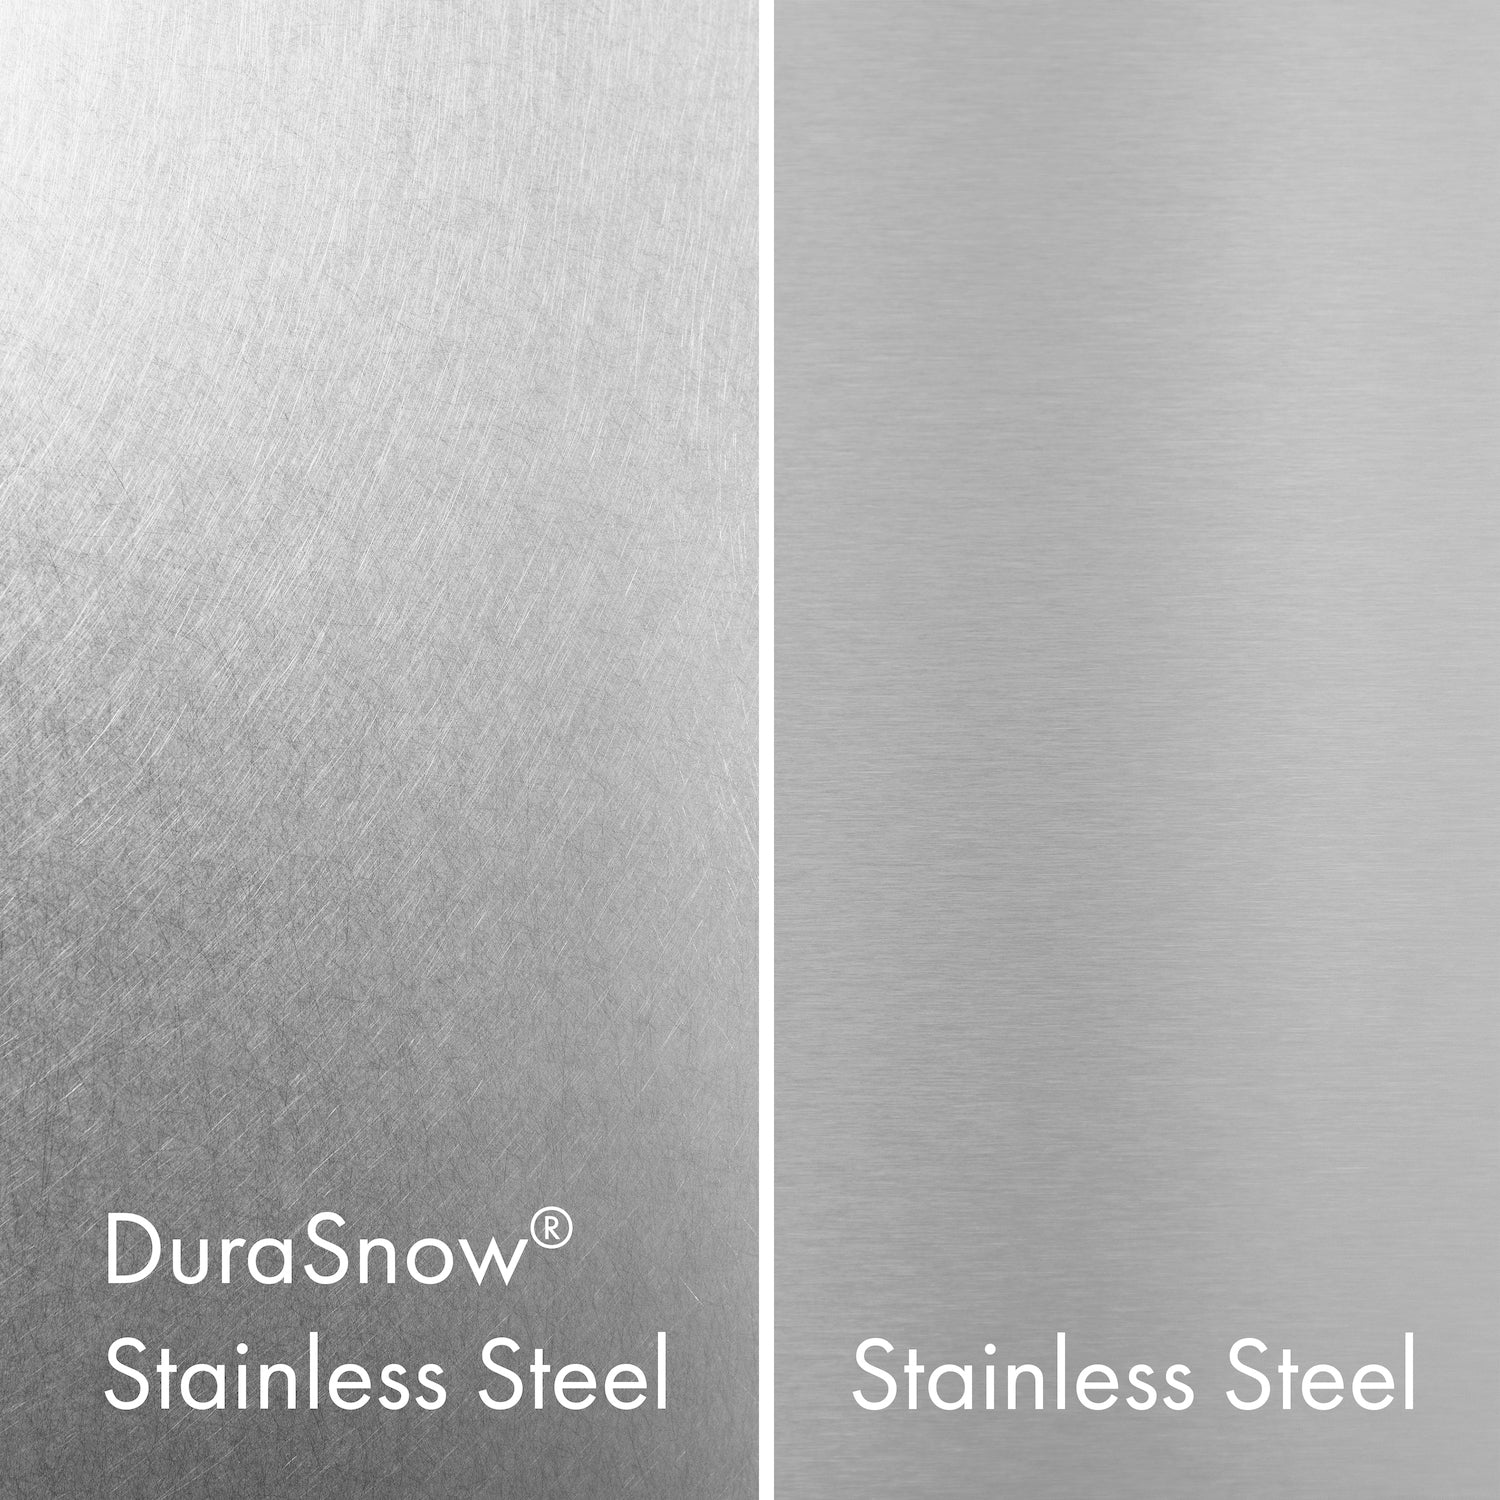 ZLINE DuraSnow Stainless Steel compared with standard stainless steel.